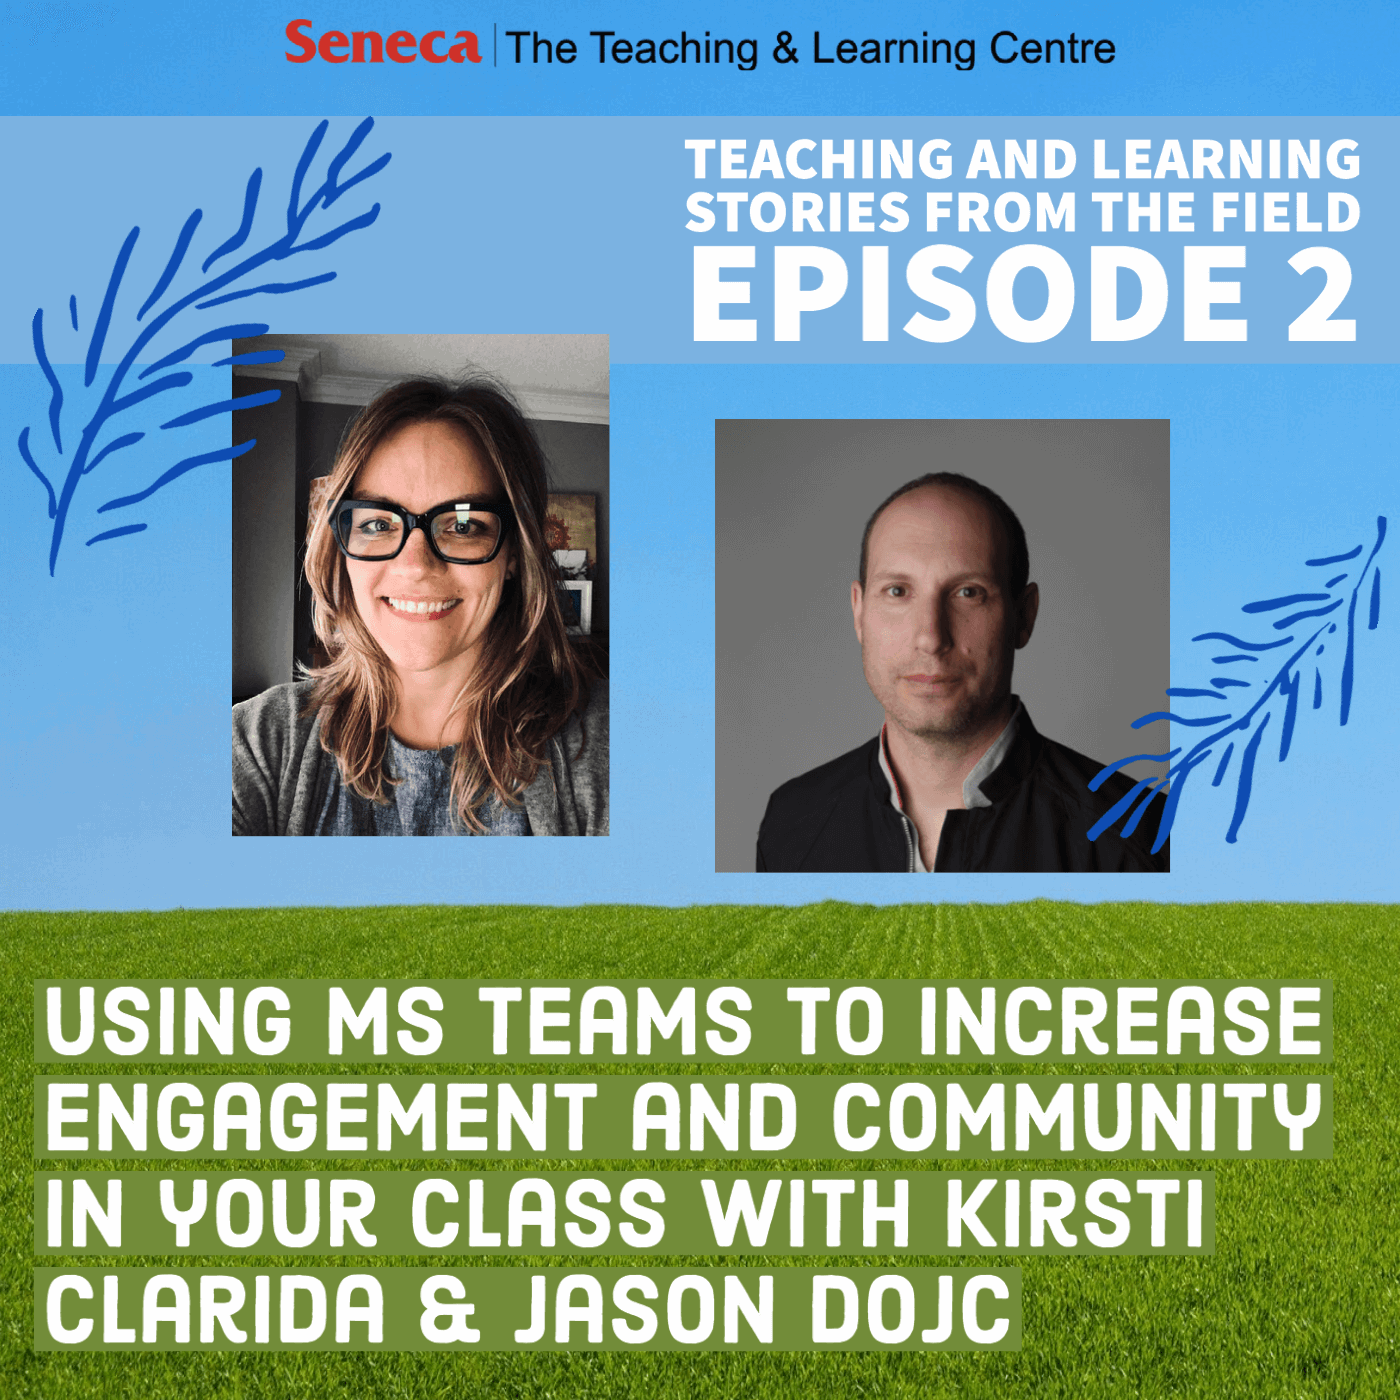 Episode 2 of the Teaching and Learning Stories podcast is called Using Microsoft Teams to Increase Engagement and Community in Your Class with Kirsti Clarida and Jason Dojc